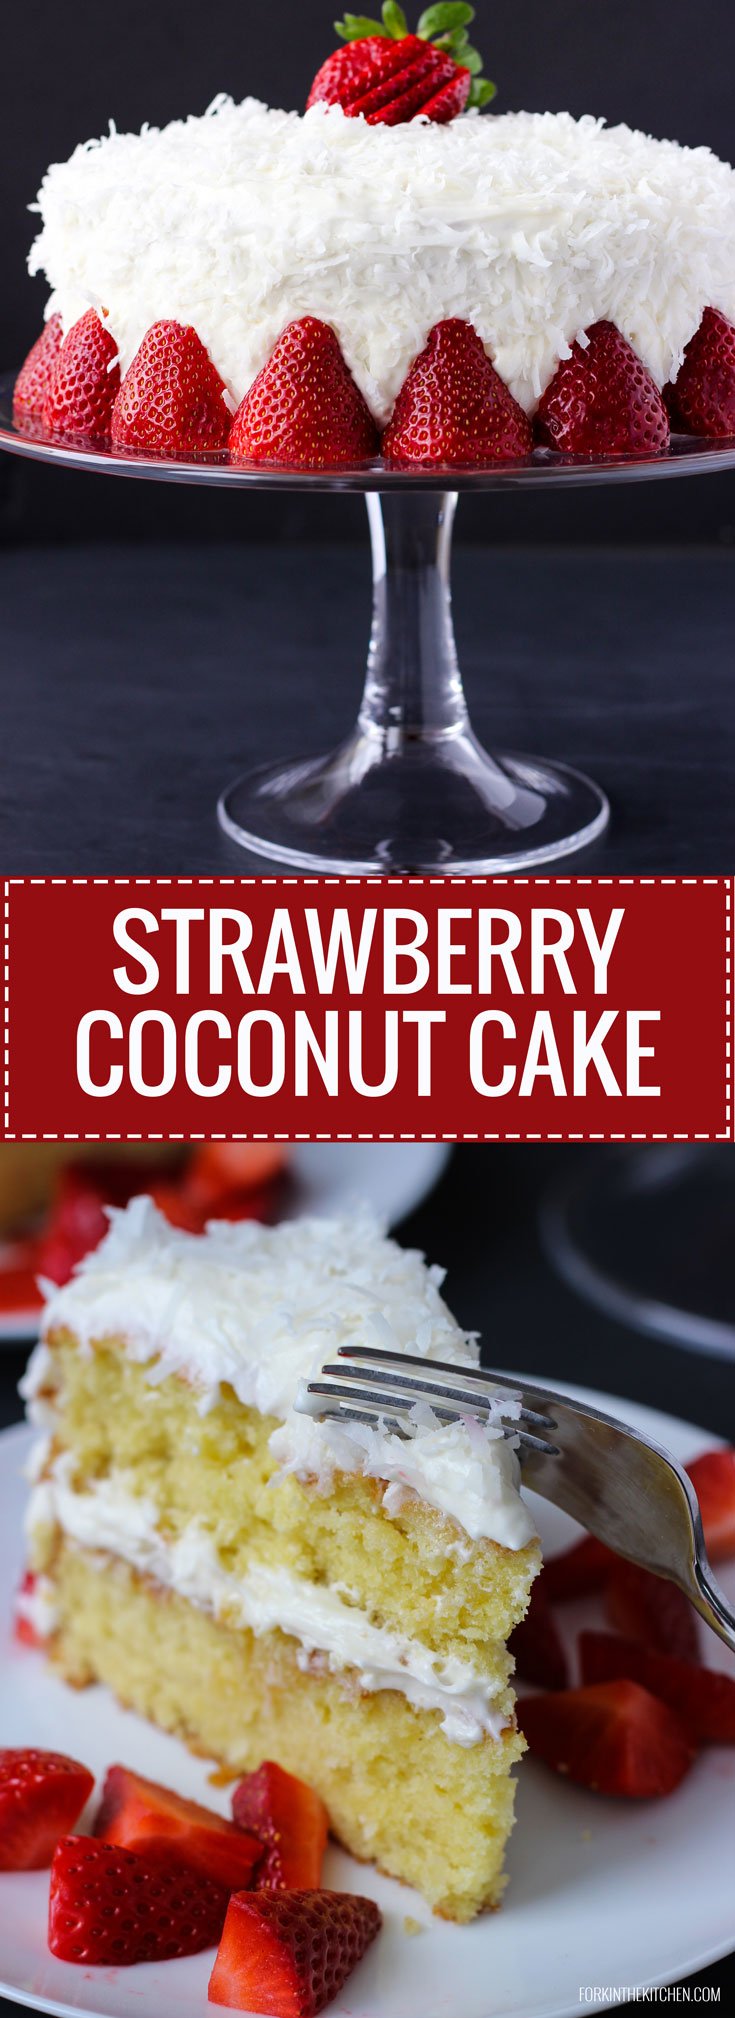 Strawberry Coconut Cake - moist, light, coconut cake with creamy frosting and a sweet strawberry sauce.